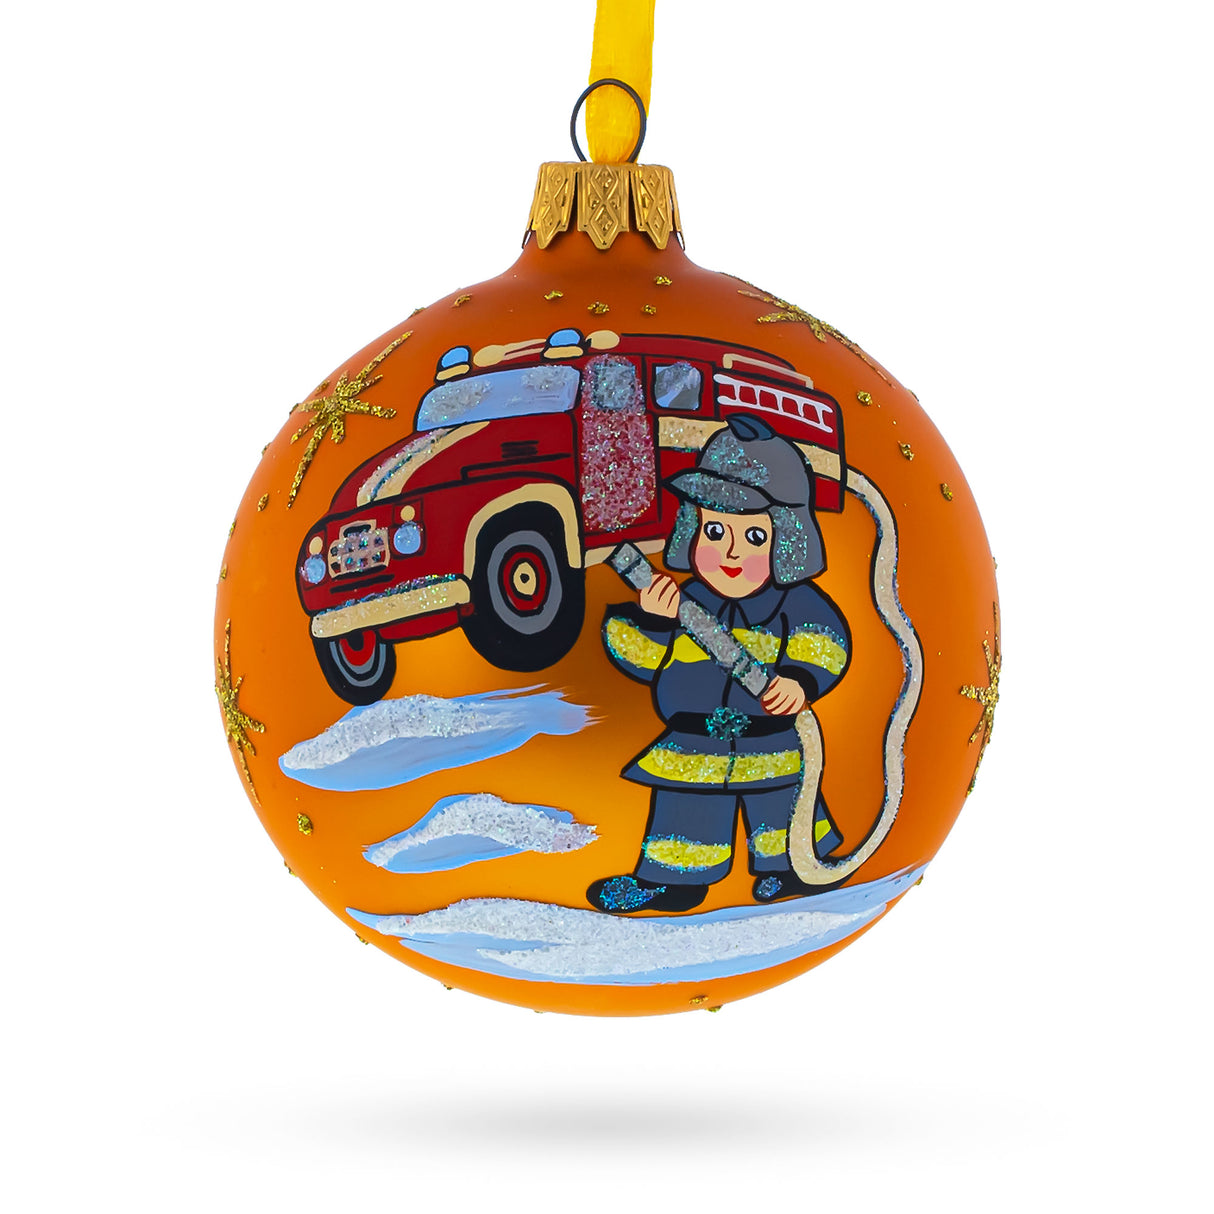 Glass Brave Little Fireman: Hand-Painted Blown Glass Ball Christmas Ornament 3.25 Inches in Orange color Round